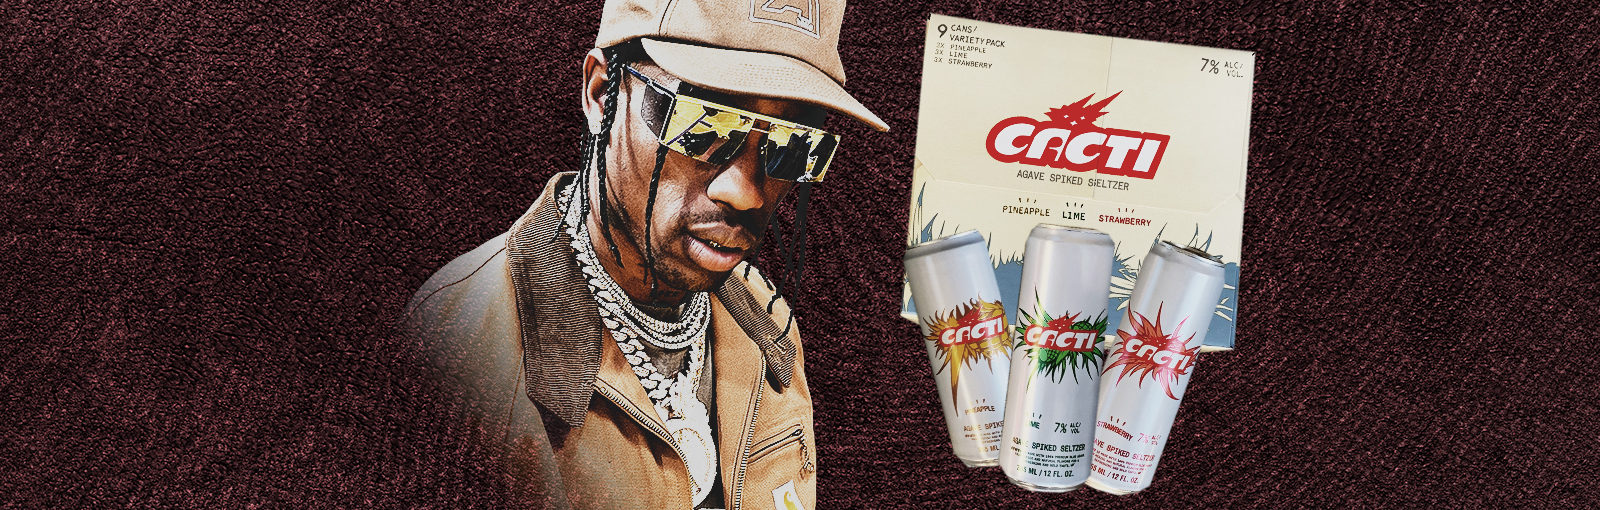 A Full Review Of CACTI, Travis Scott’s Agave Spiked Seltzer